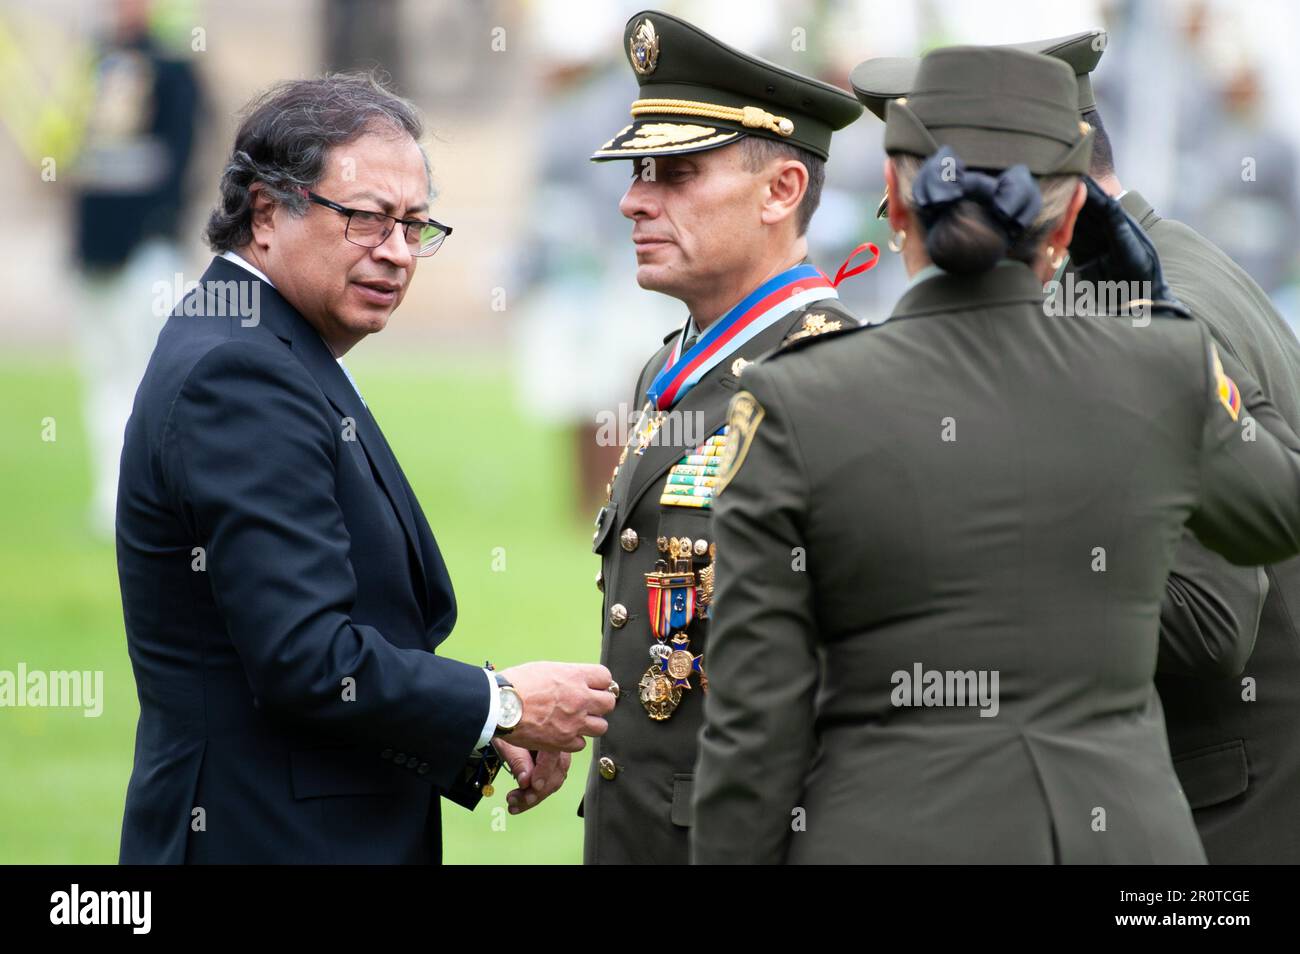 Bogota, Colombia. 09th May, 2023. Colombian police outgoing director, general Henry Sanabria Cely receives condecorations from Colombian president Gustavo Petro during the ceremony of the new Colombian Police Director William Rene Salamanca at the General Santander Police Academy in Bogota, Colombia. May 9, 2023. Photo By: Cristian Bayona/Long Visual Press Credit: Long Visual Press/Alamy Live News Stock Photo